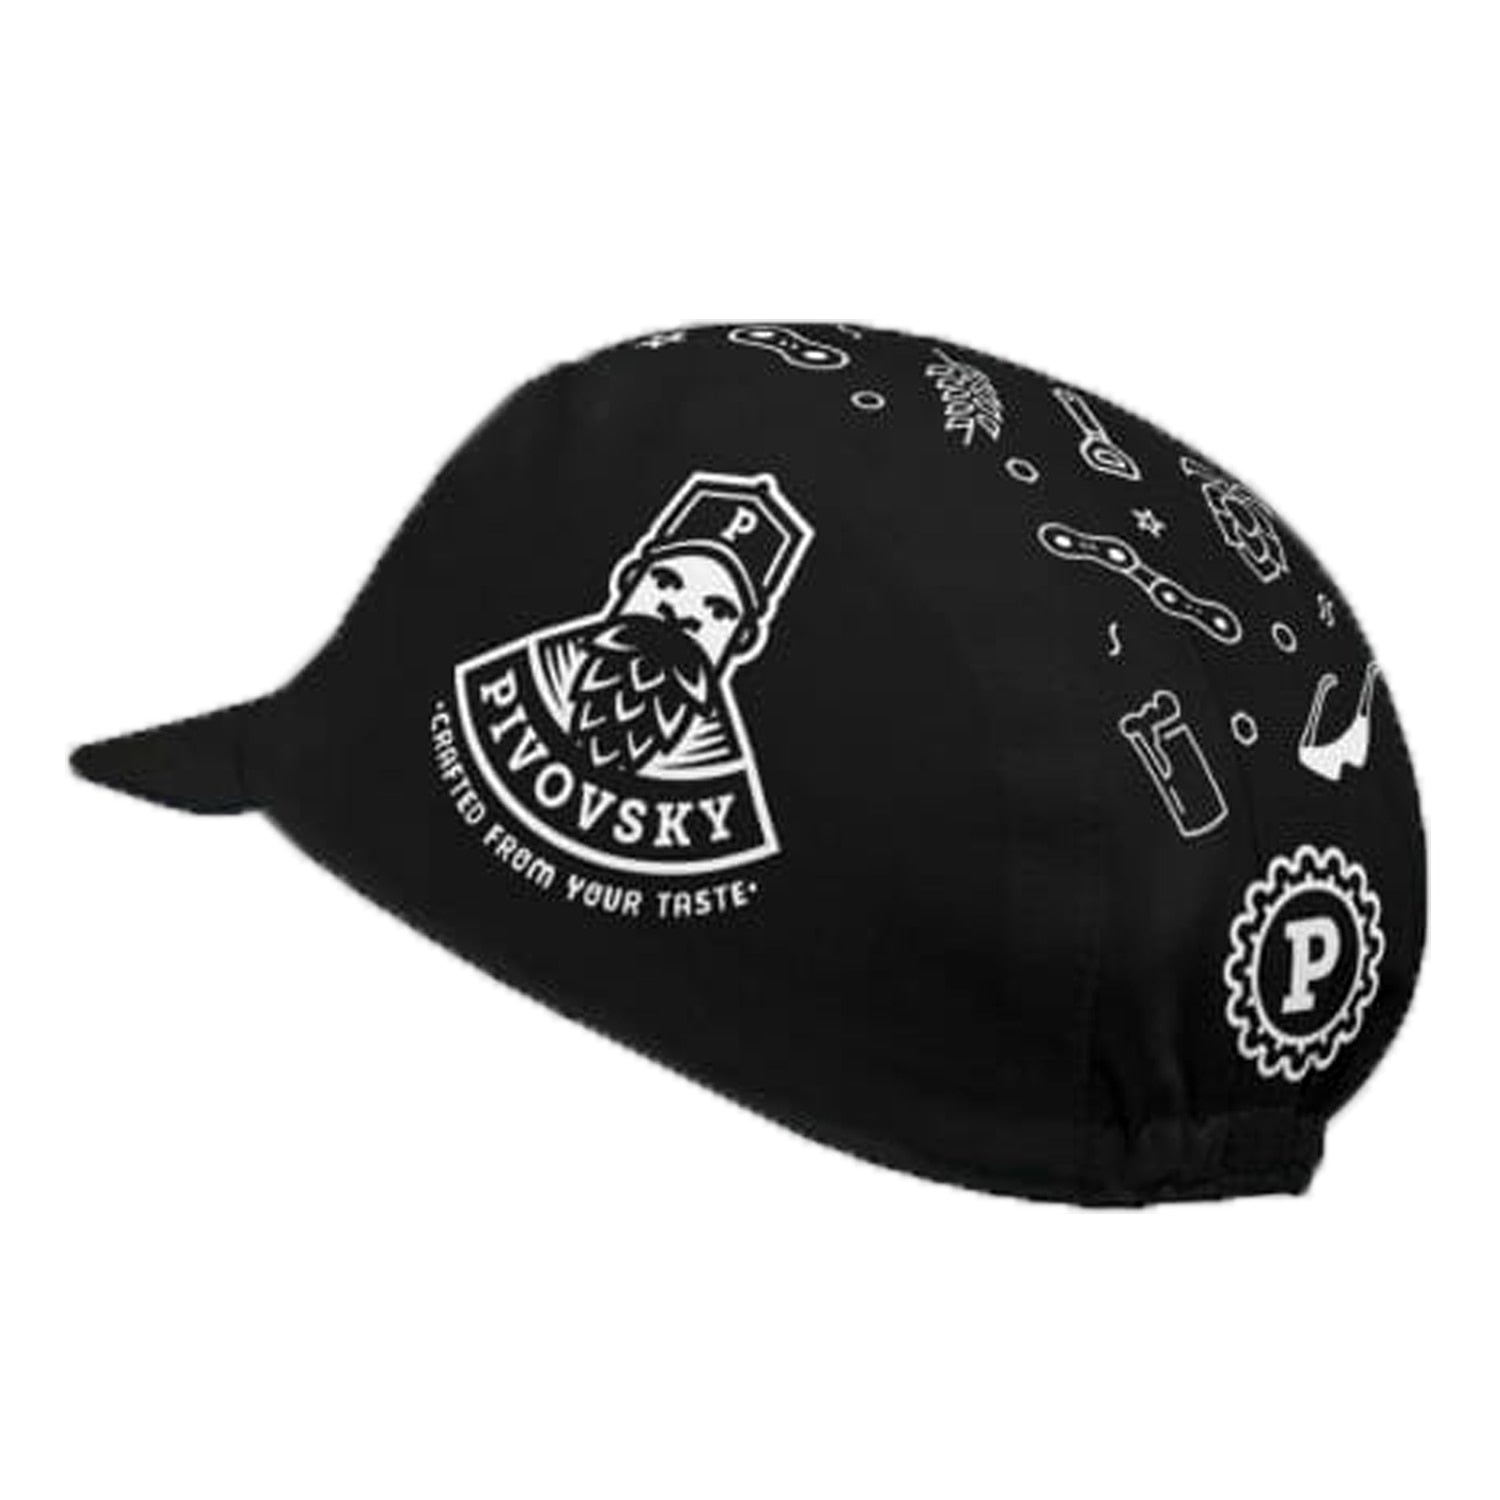 Classic Black Retro Cycling Caps Polyester/Fleece Moisture Wicking Men And Women Wear Quick Dry For Bicycle Hat Balaclava